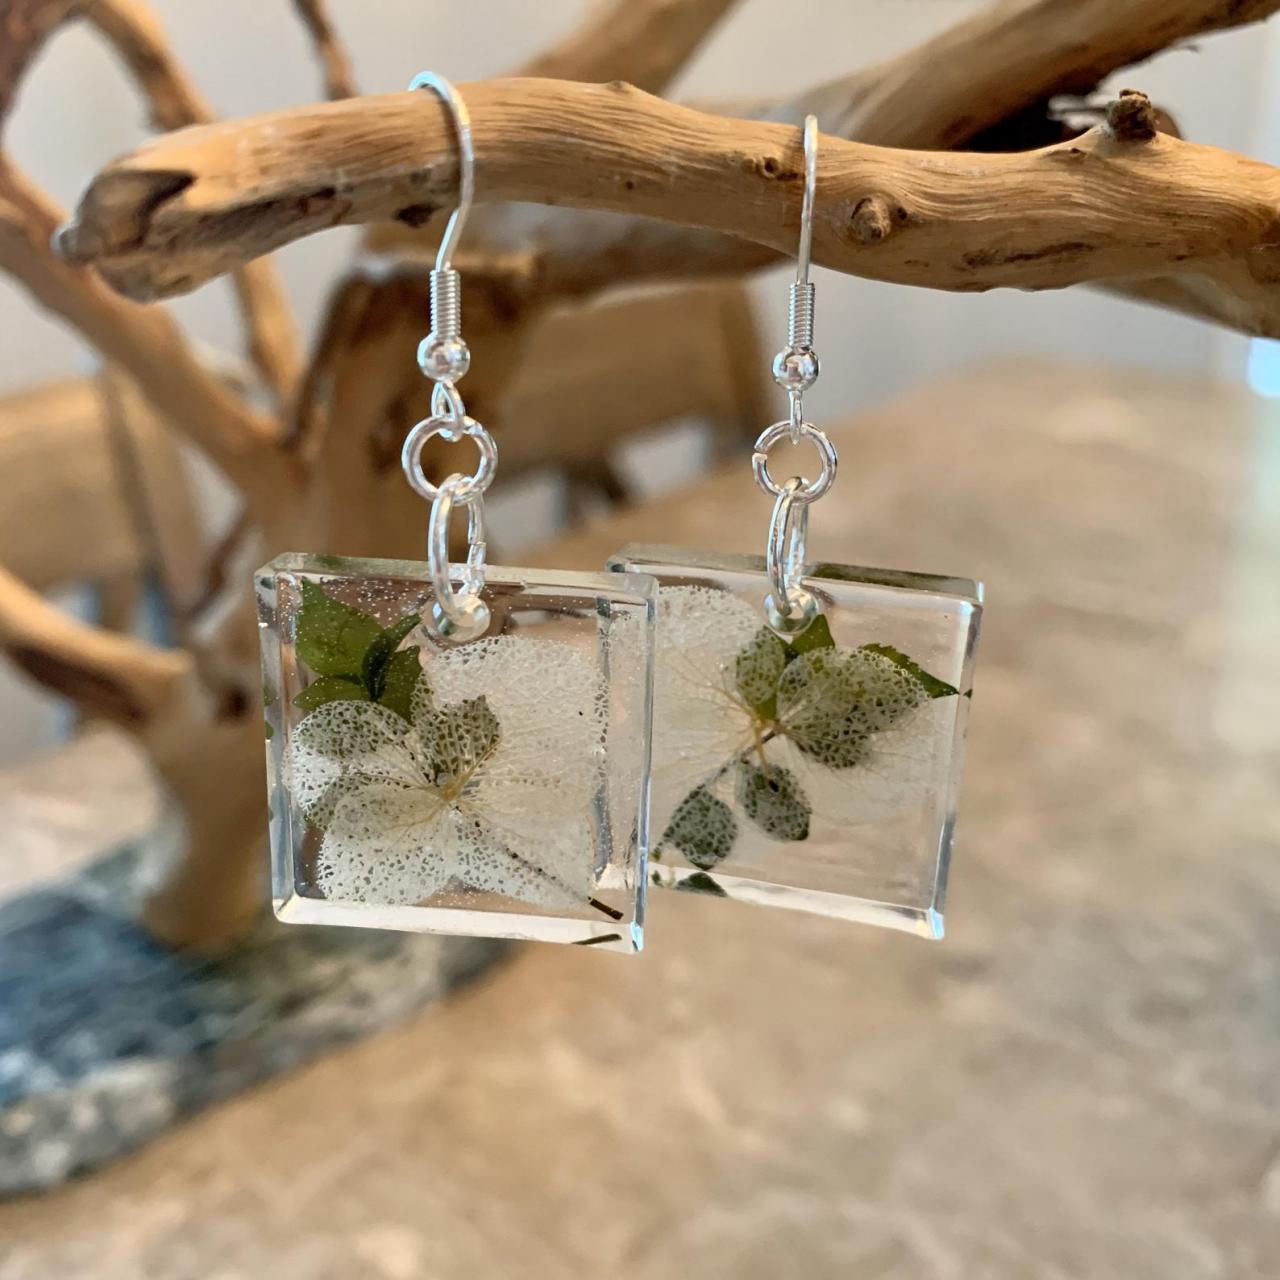 Pressed Dried Flowers Earrings, Resin Flower Jewelry, Unique Gift Grad, Preserved Flowers, Boho, Minimalist Jewelry Gifts, Nature Gift, Botanic